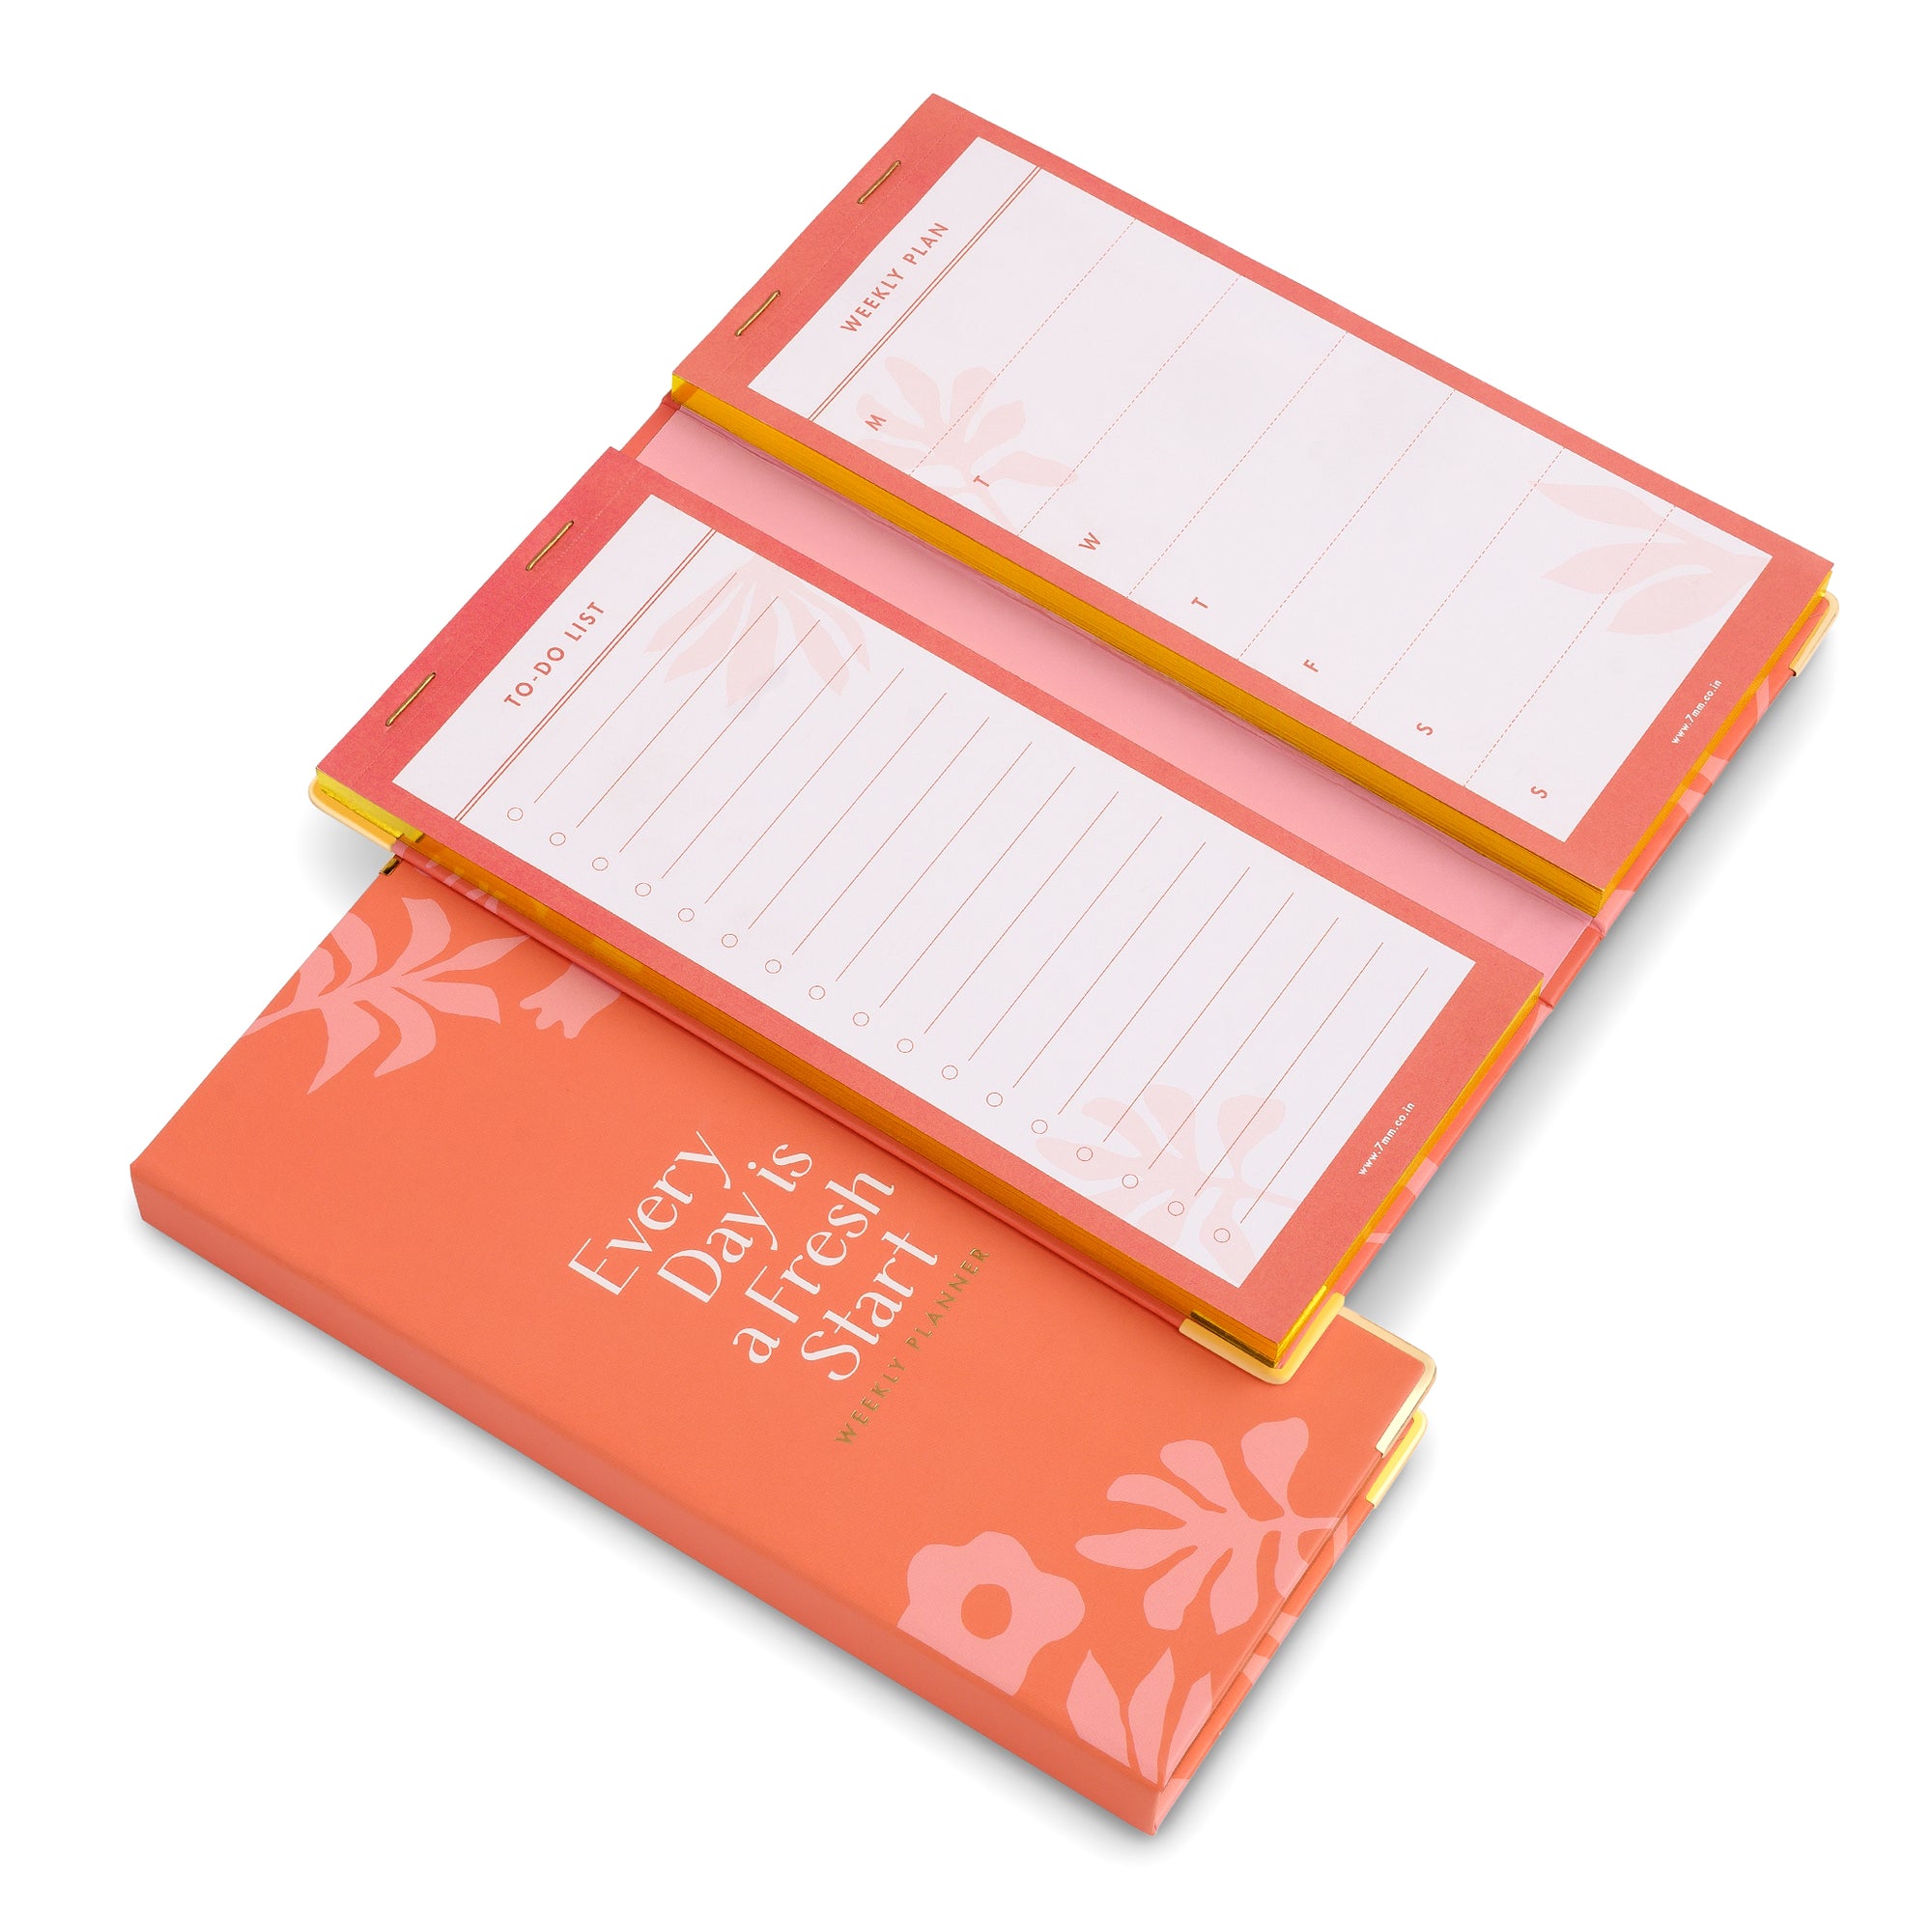 Weekly Planner (Coral Rush)